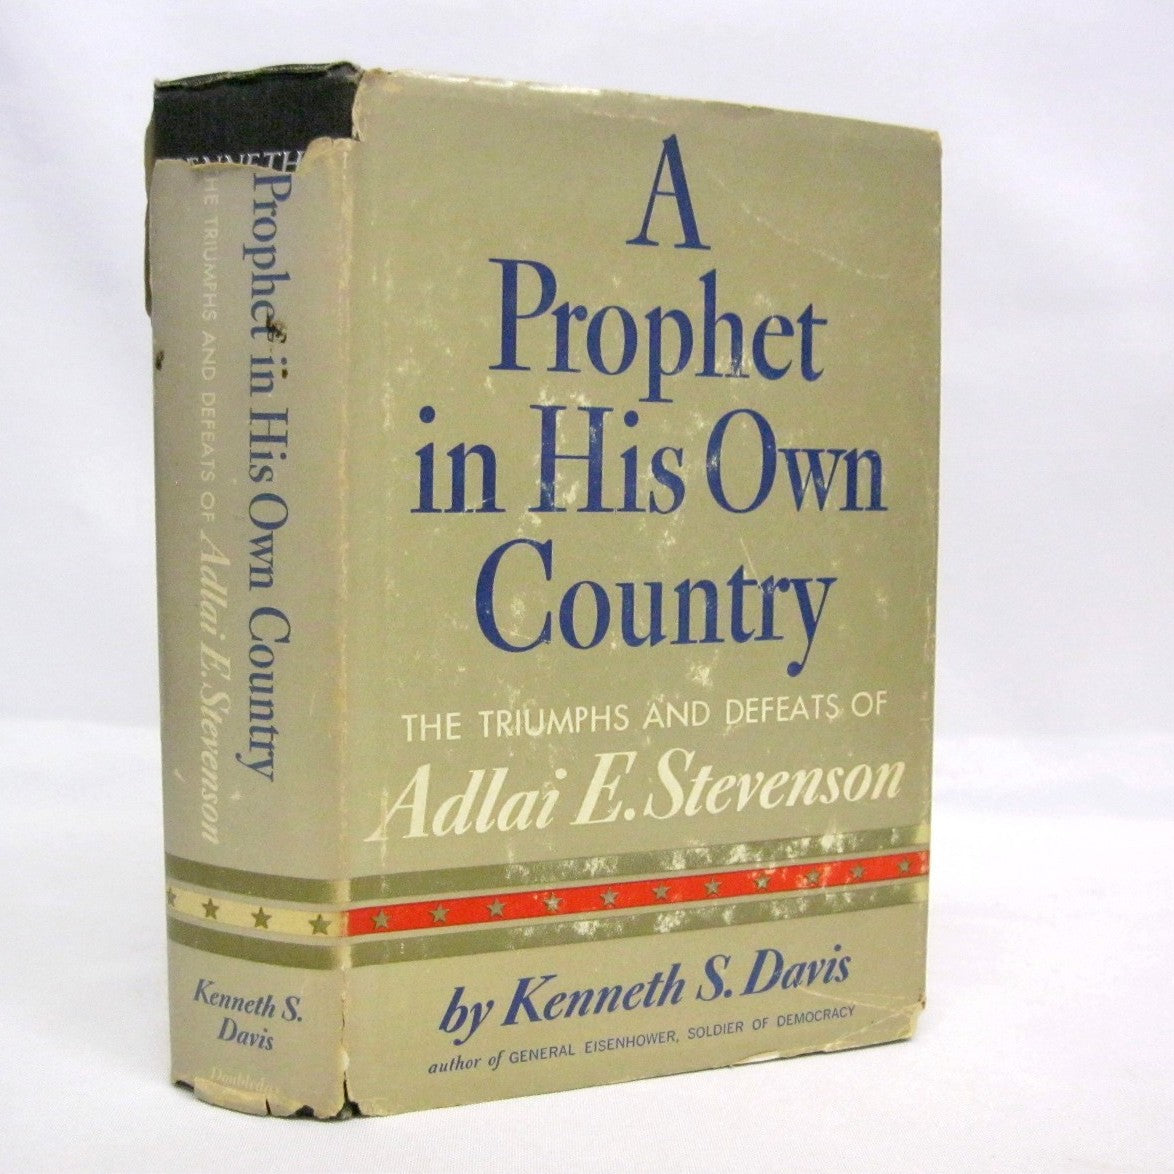 A Prophet in His Own Country: The Triumphs and Defeats of Adlai E. Stevenson by Kenneth S. Davis